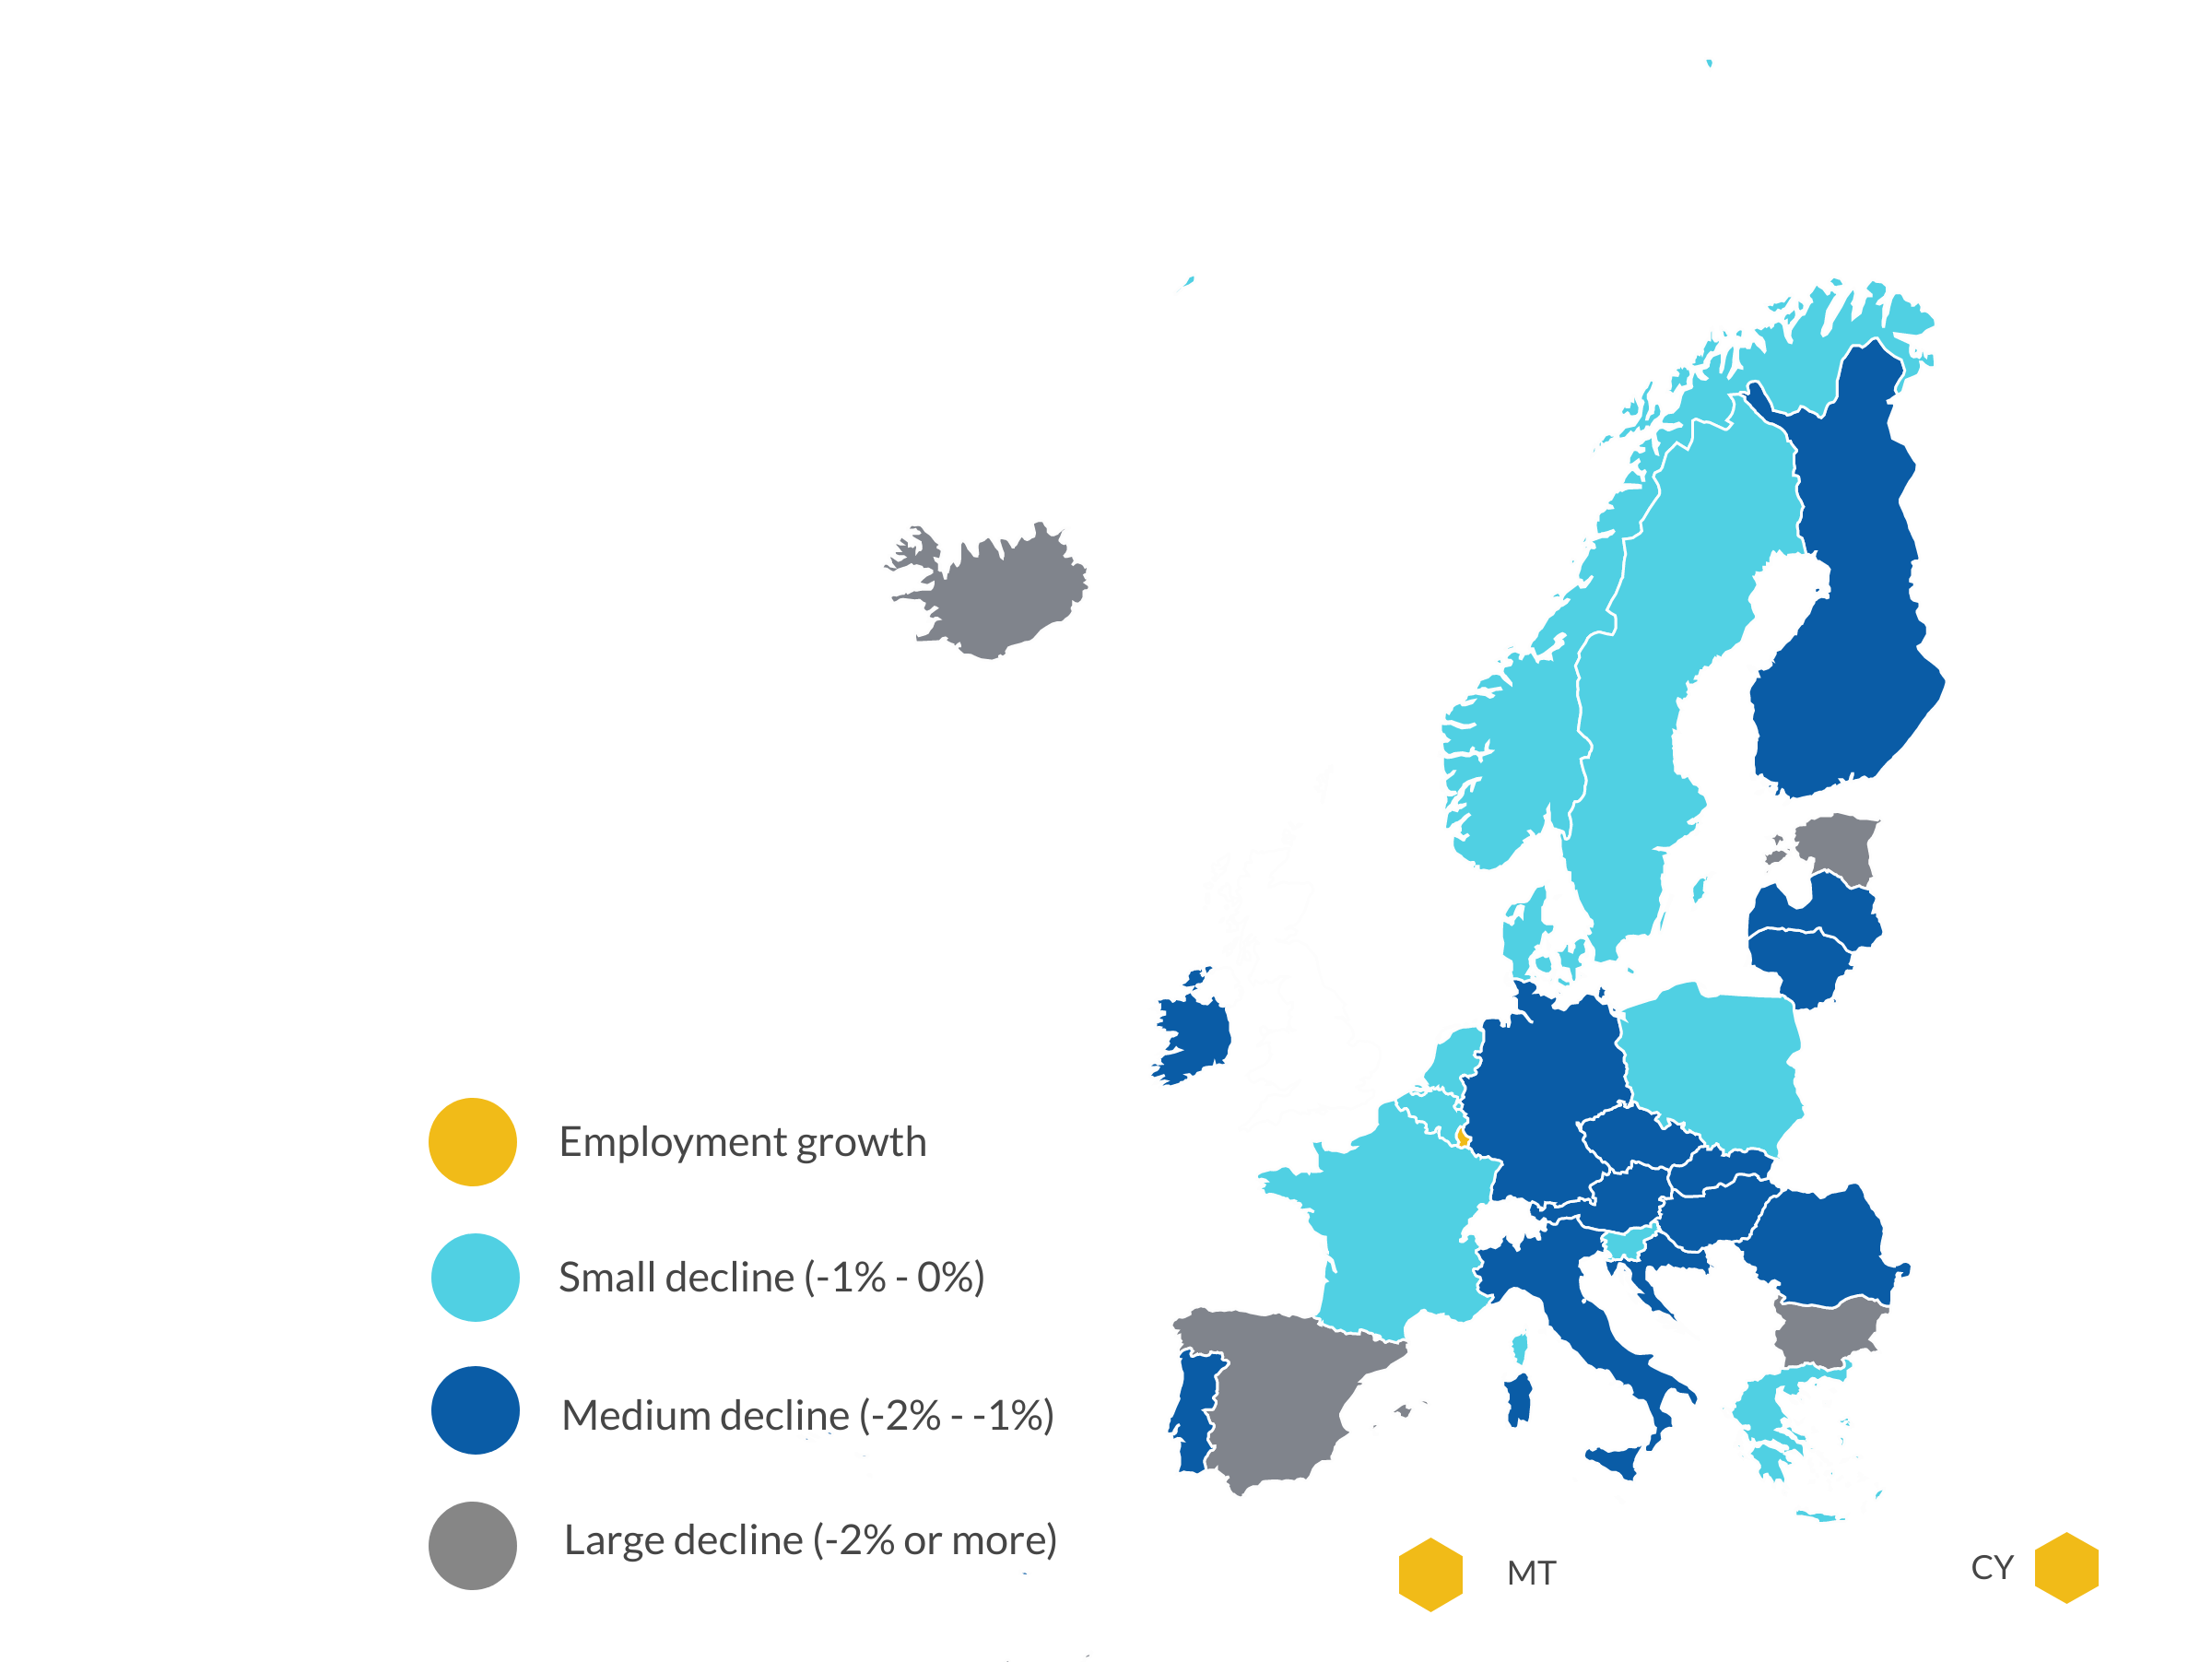 Only Malta, Luxembourg and Cyprus recorded employment growth in 2020.